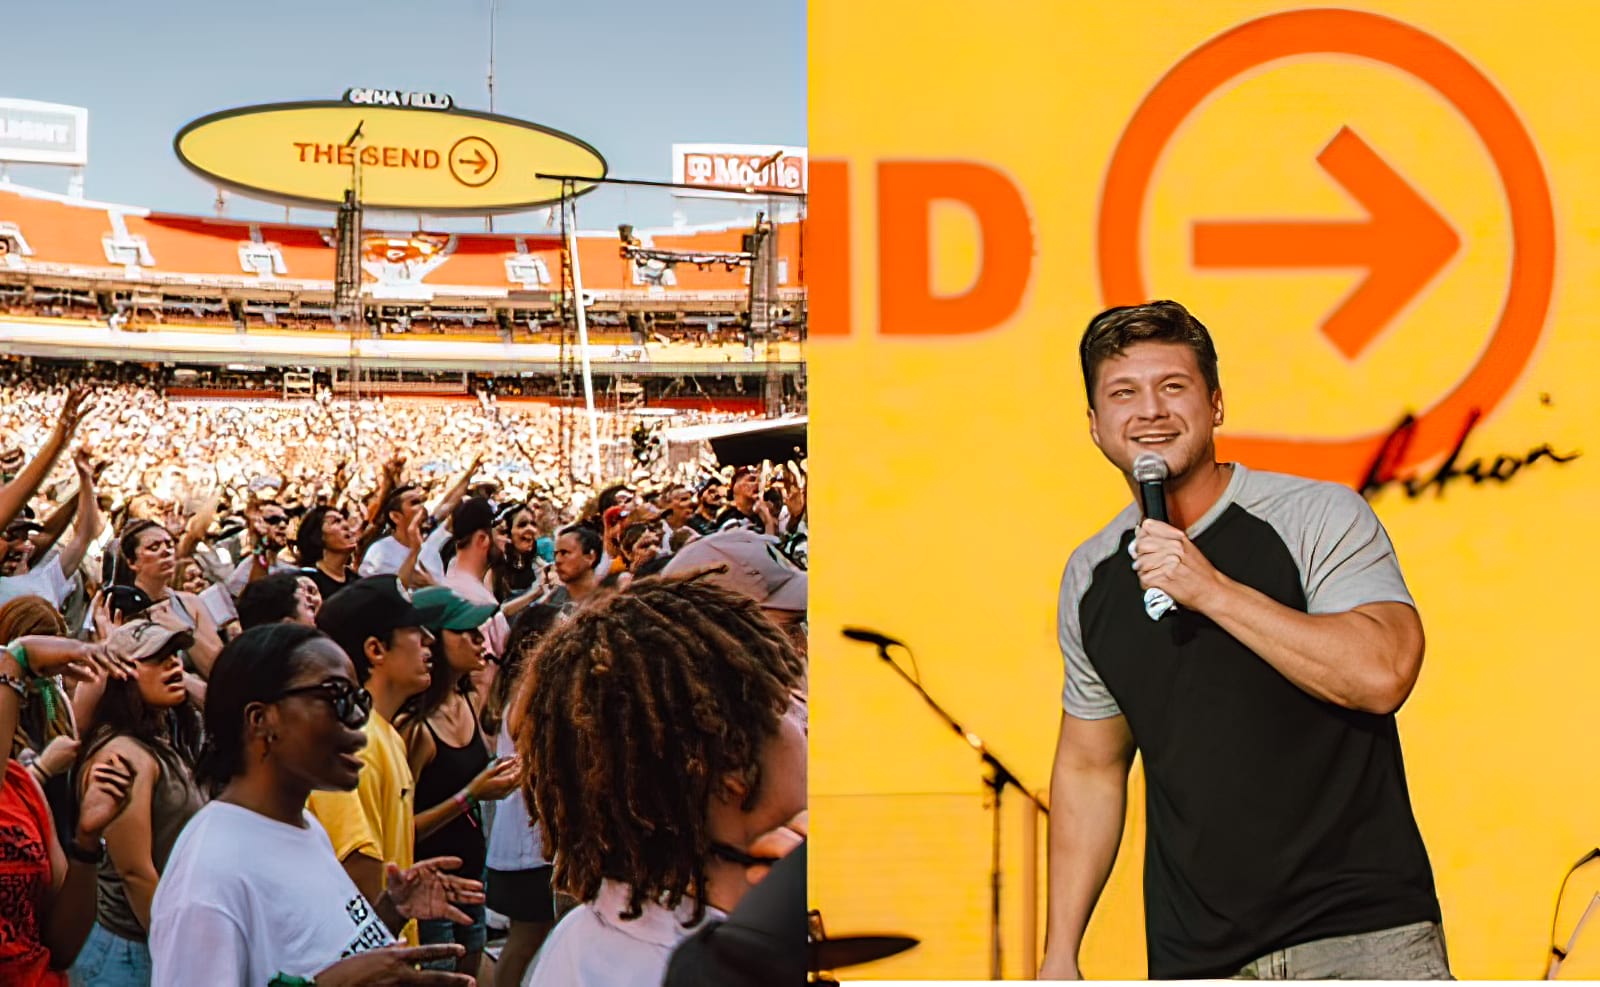 The CfaN day-long event brought tens of thousands of primarily young people together at Arrowhead Stadium in Kansas City, Missouri.